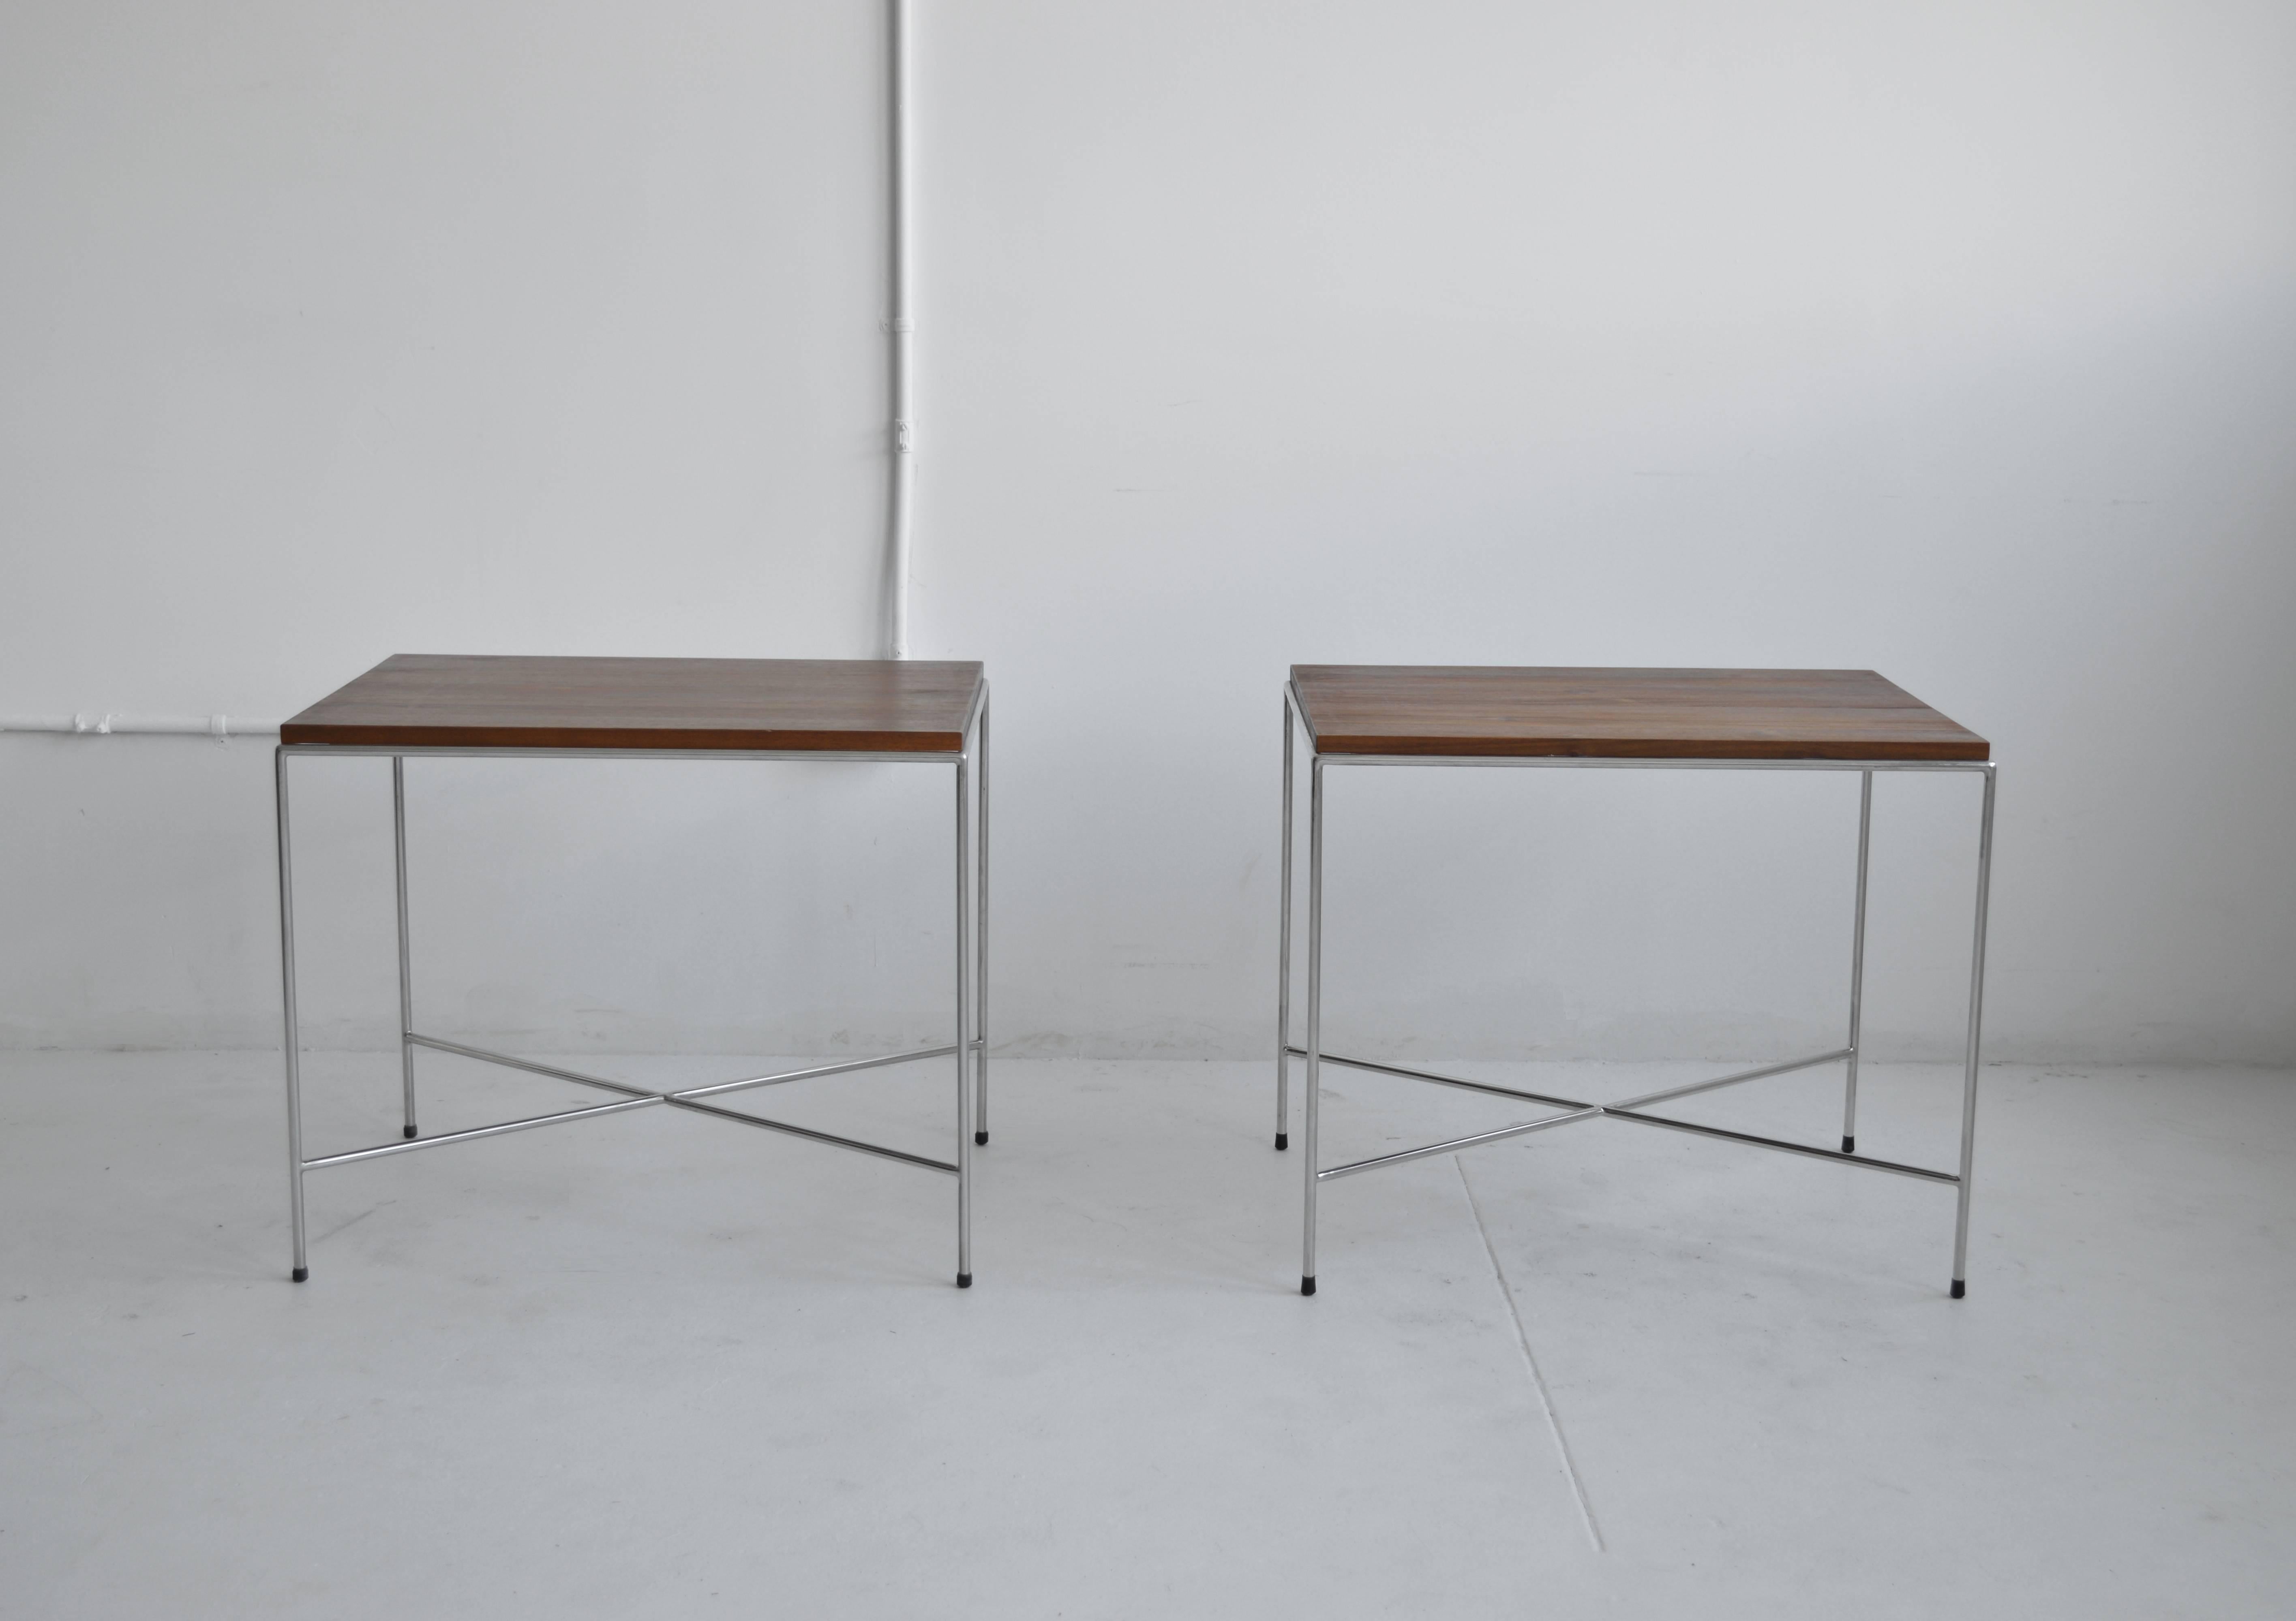 Pair of X-base side tables from Established Lines. These side or end tables are made out of solid stainless steel rods and have a 3/4